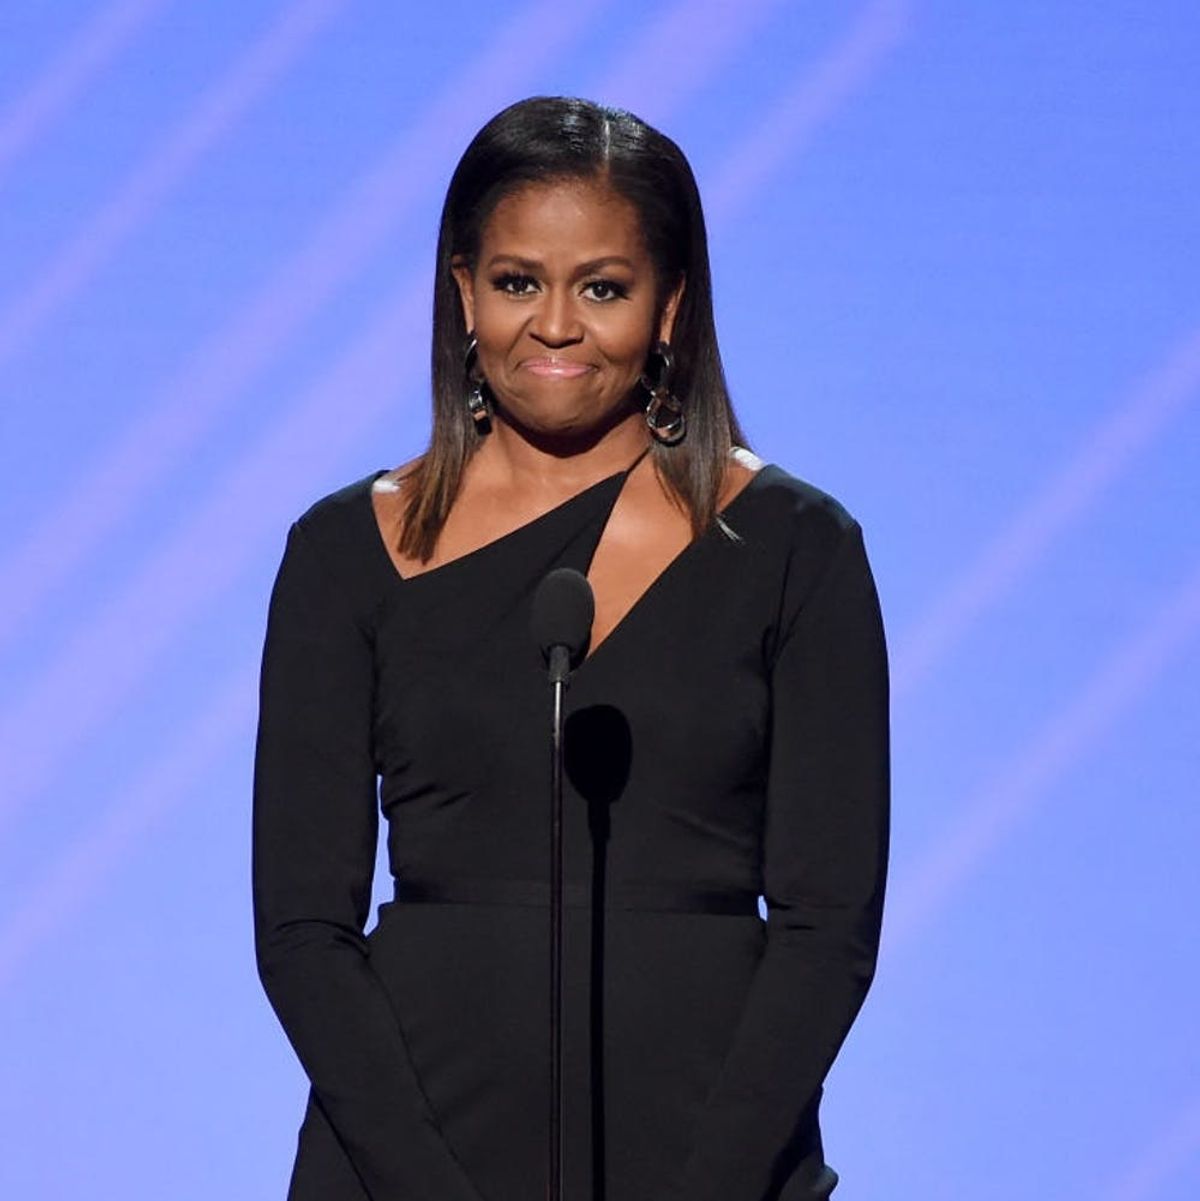 Michelle Obama Just Admitted Her Feelings About the Racism She Faced As First Lady